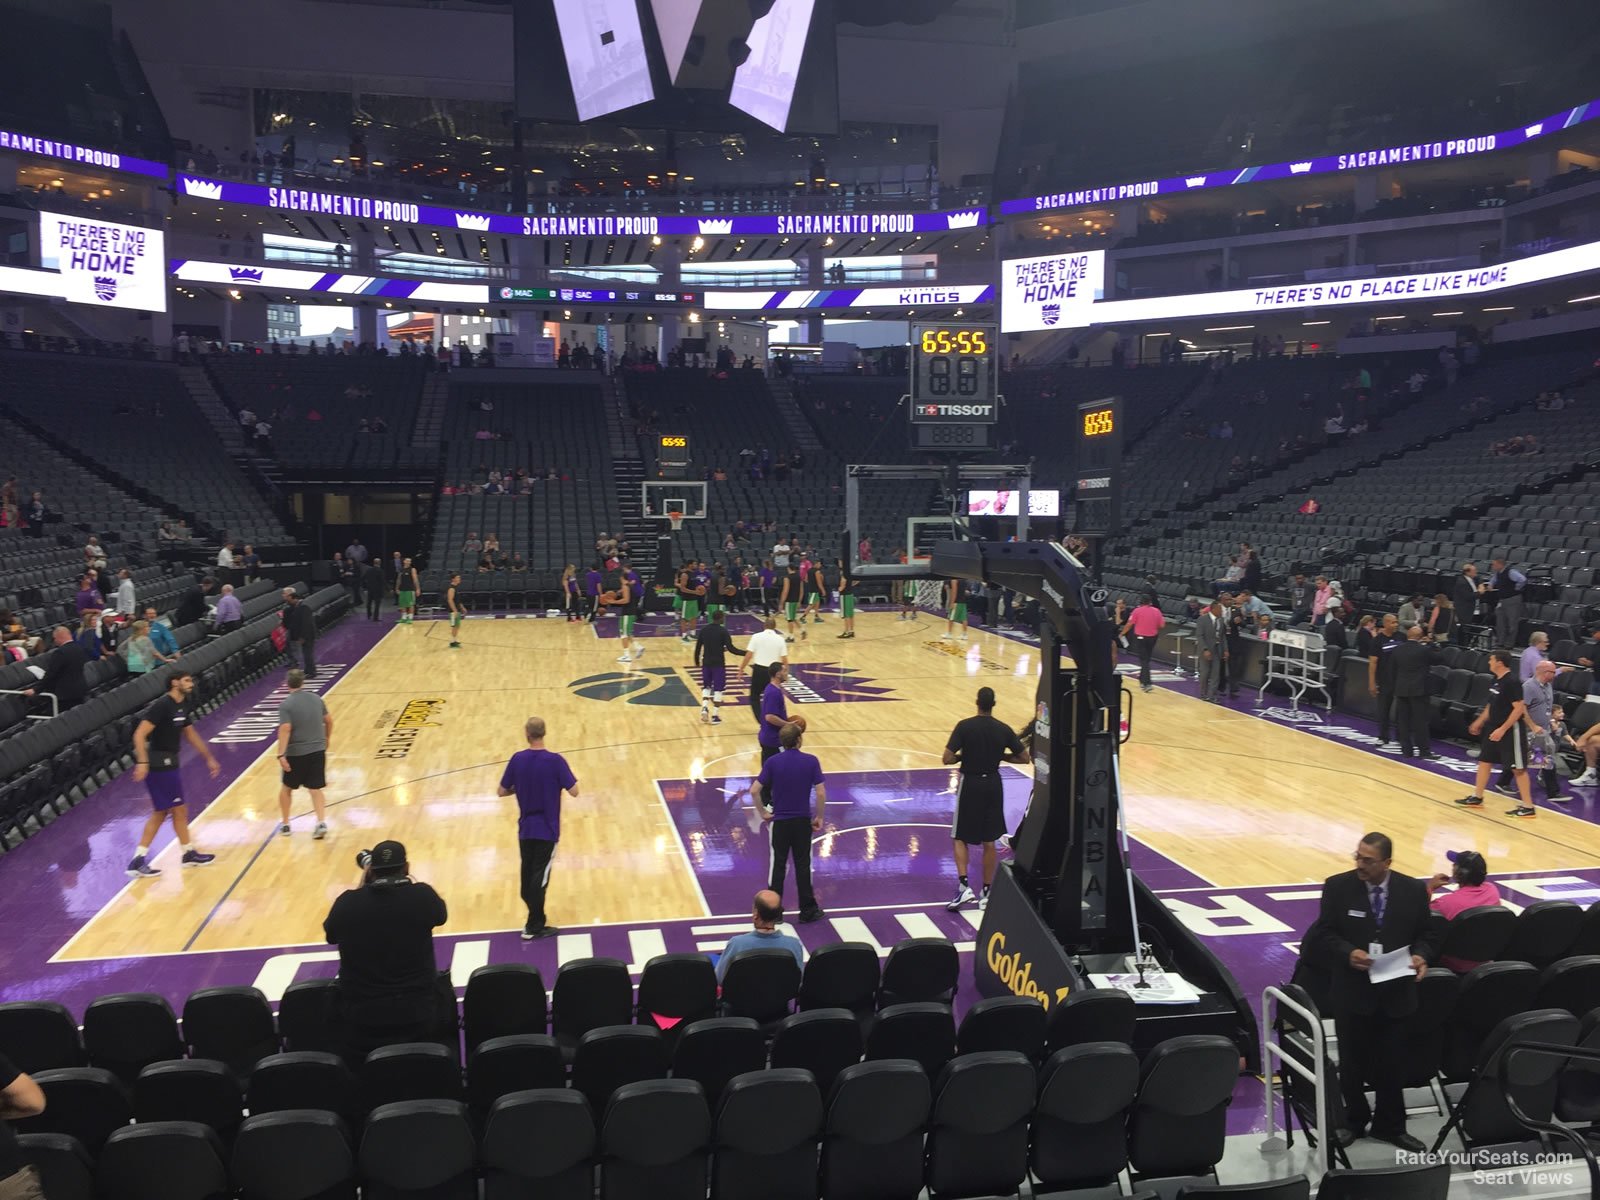 section 114, row dd seat view  for basketball - golden 1 center